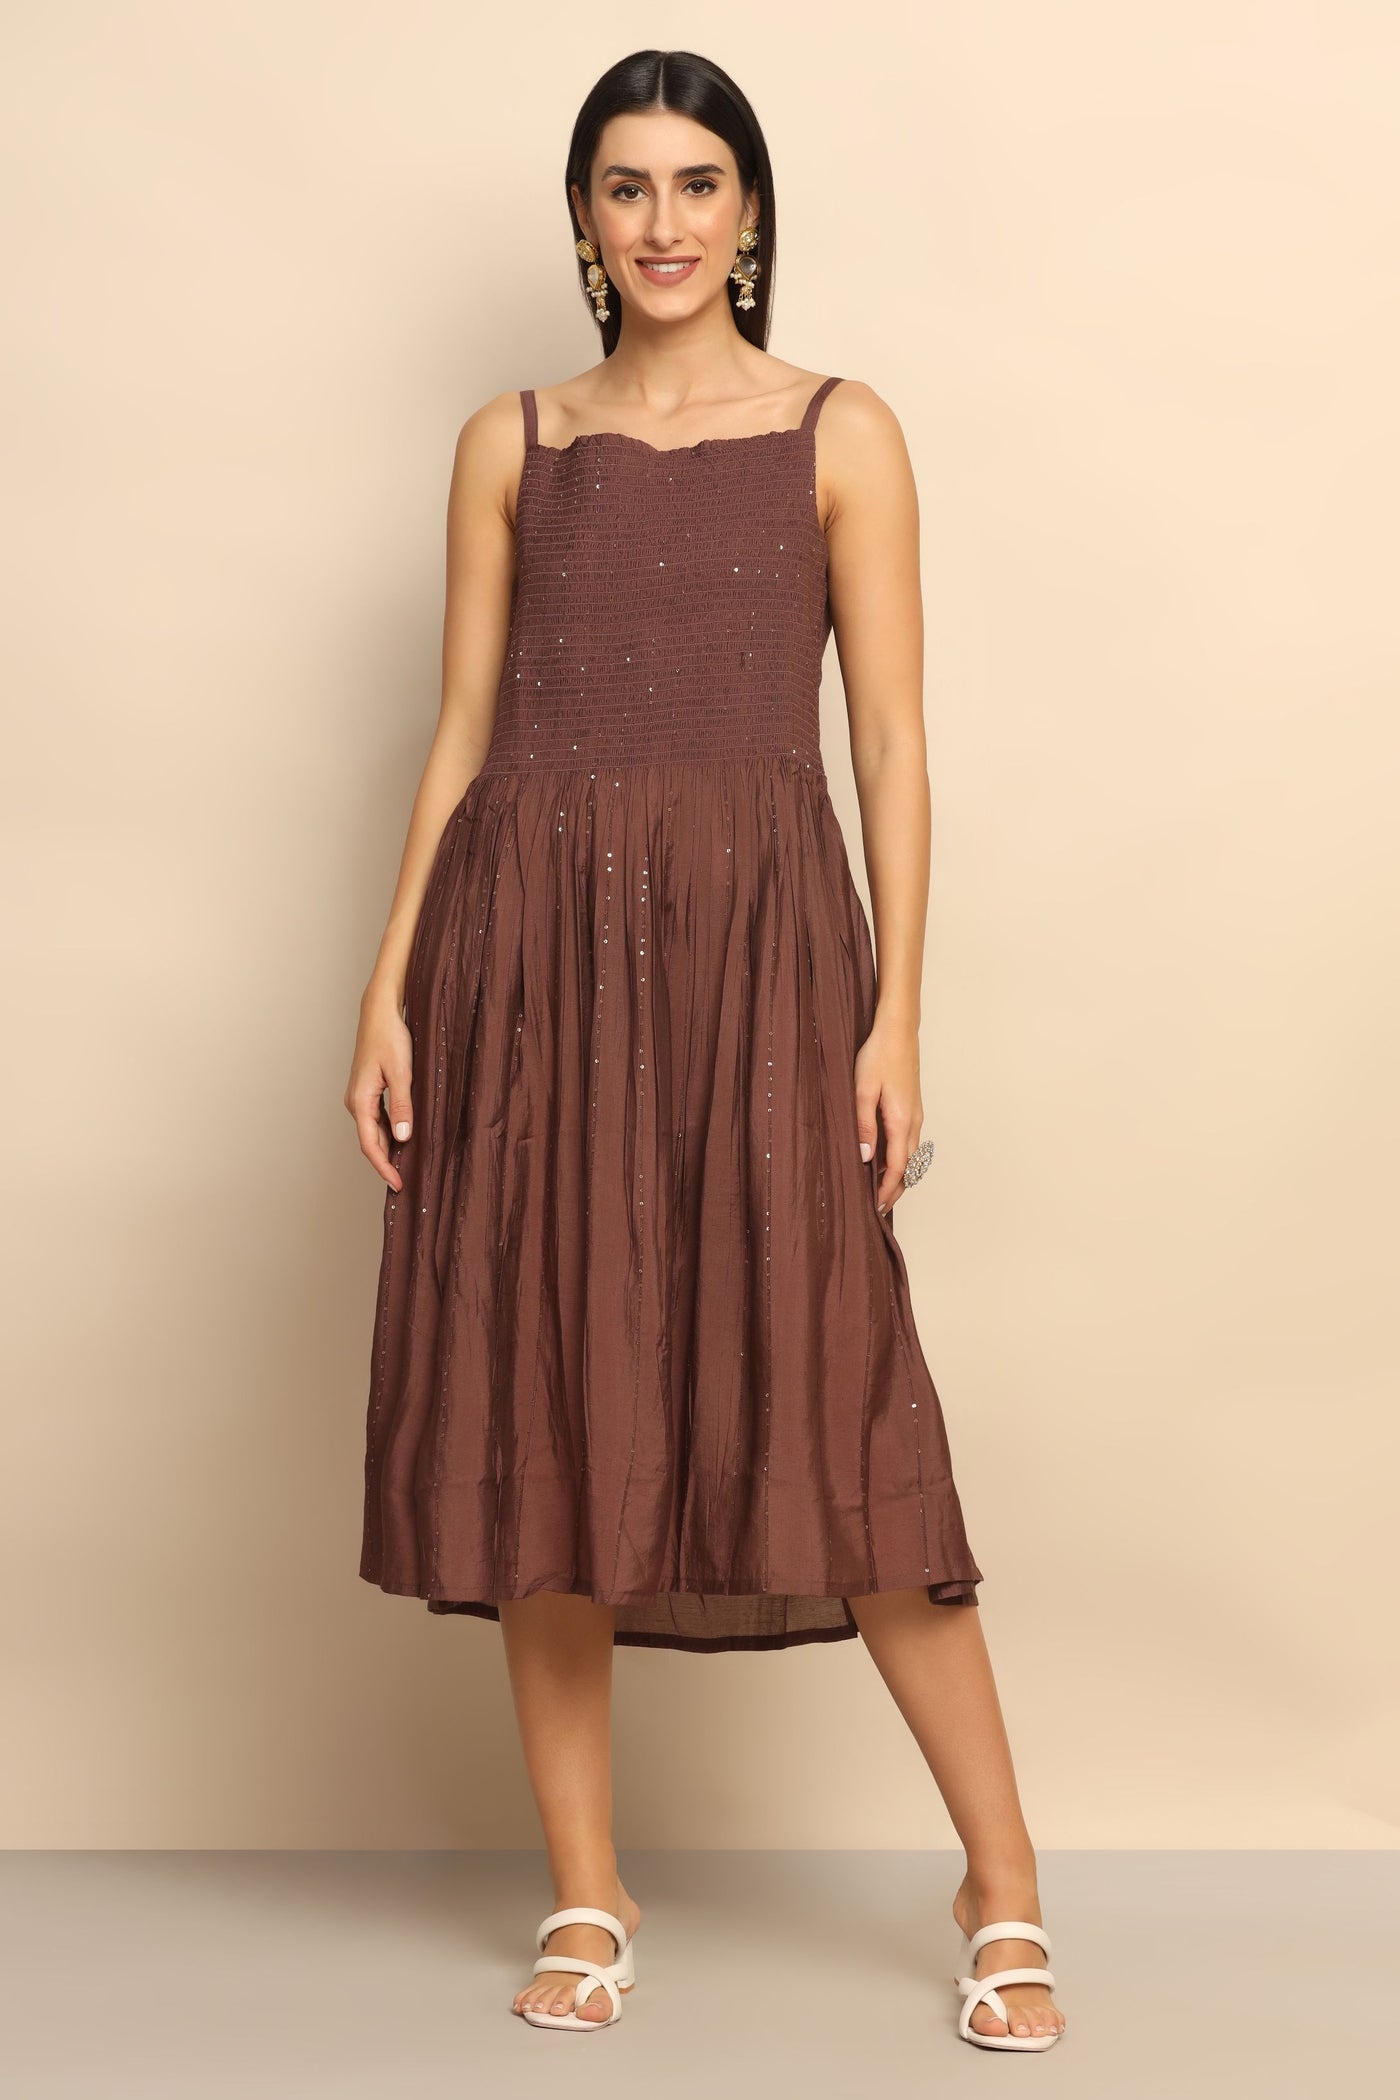 Cocoa Dream Brown Cotton Blend Dress with Mirror, Thread Work, Sequins